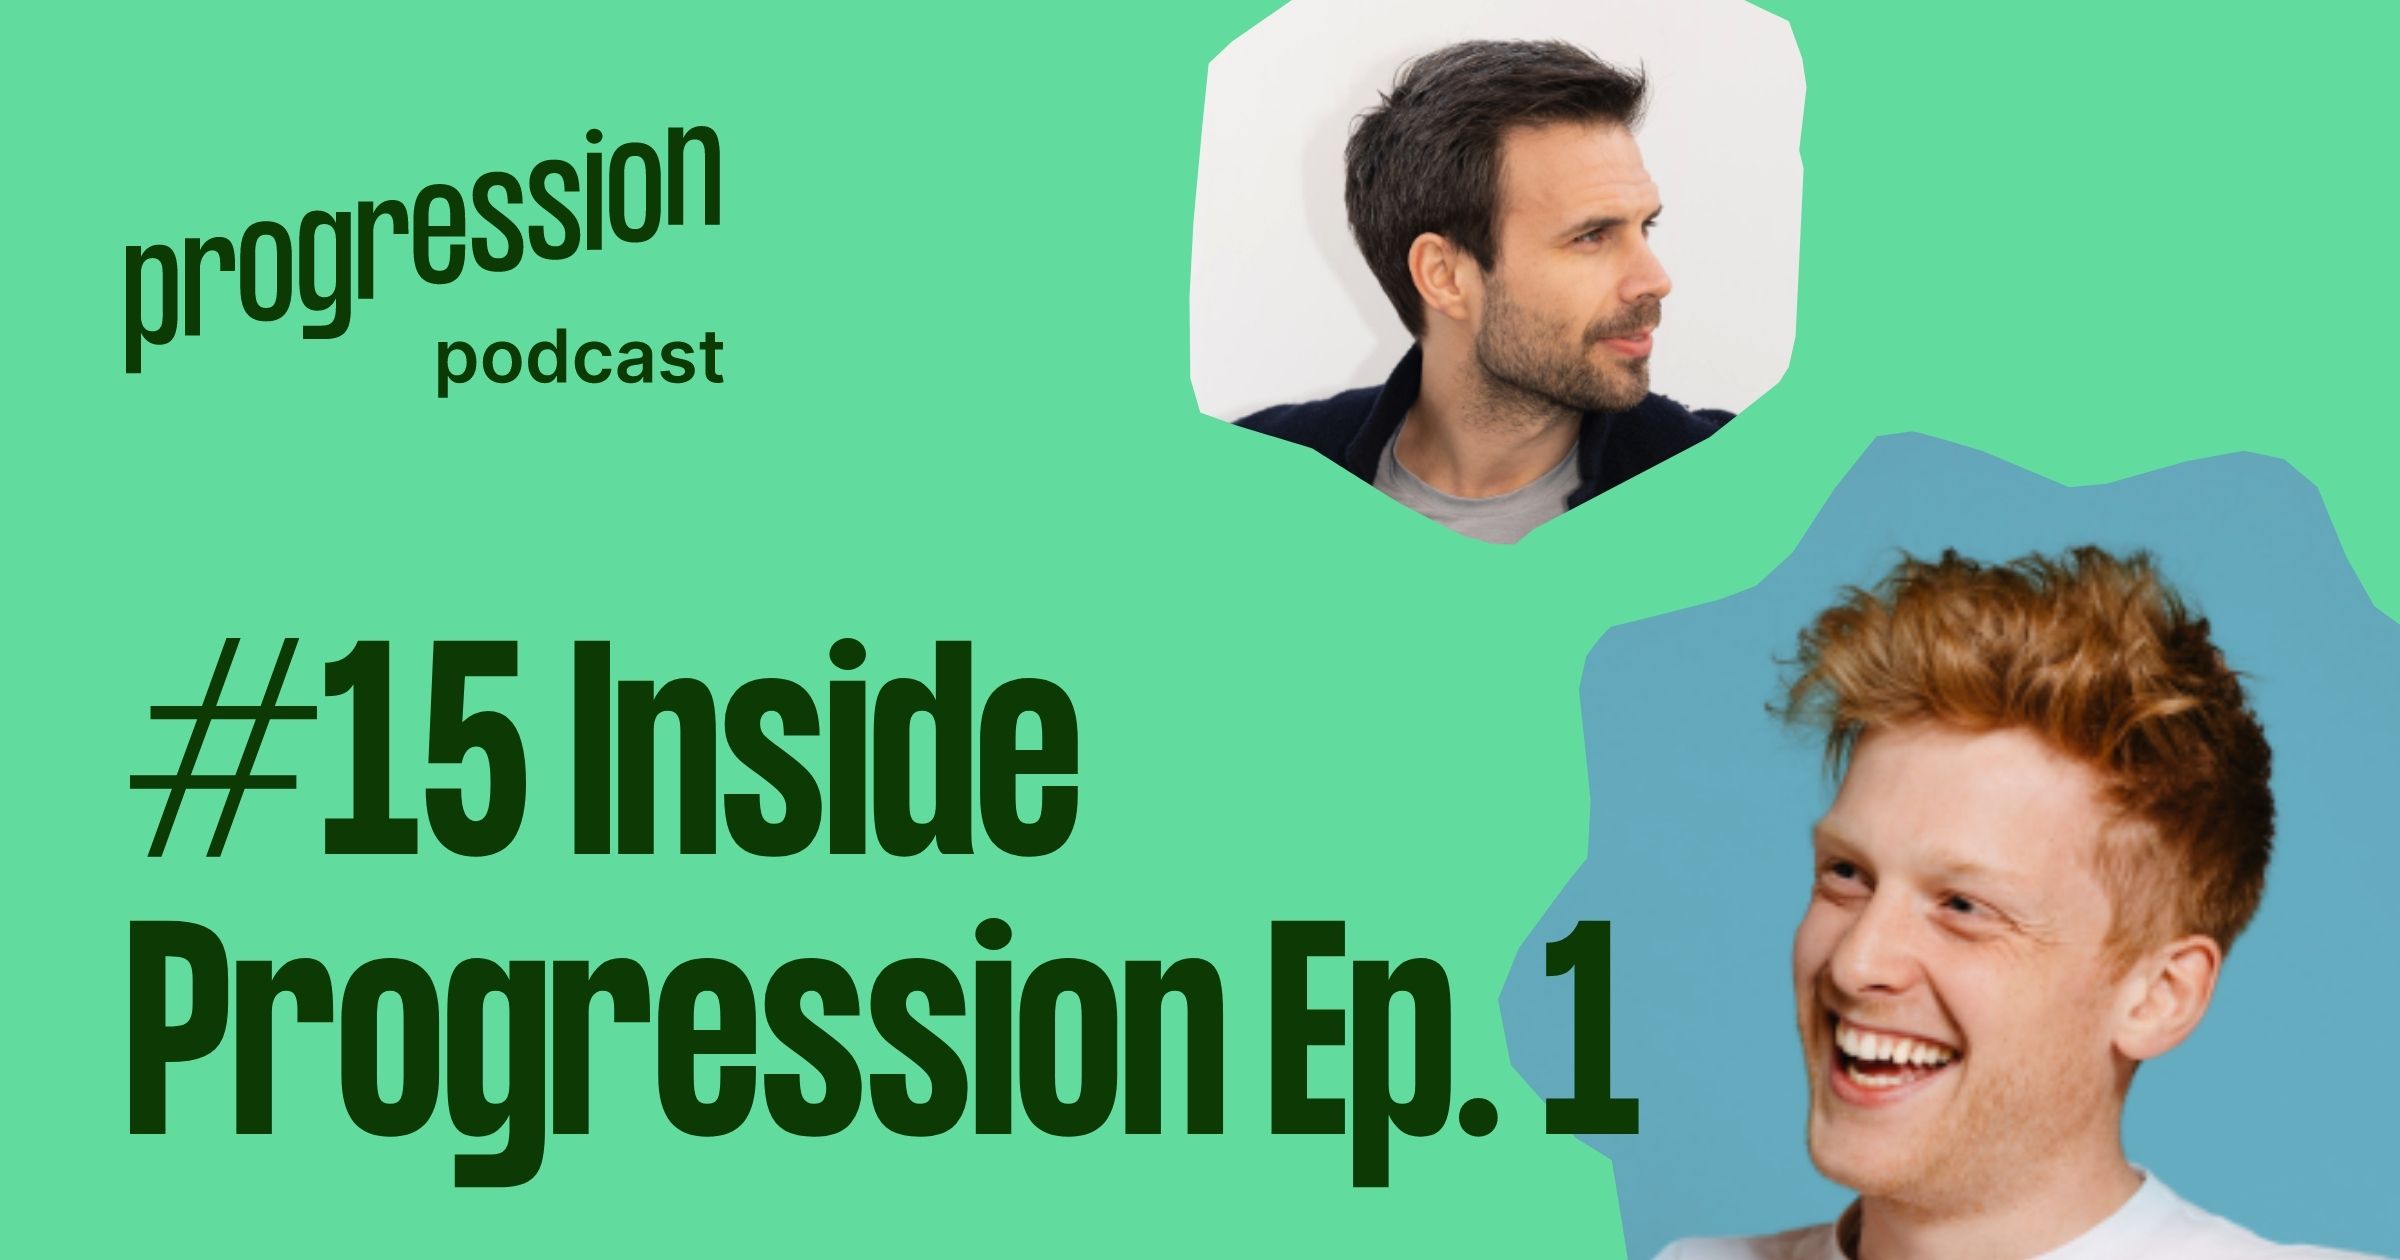 Podcast #15: Inside Progression with Jonny and Neil – teamwork, a new feature and biscuit reviews